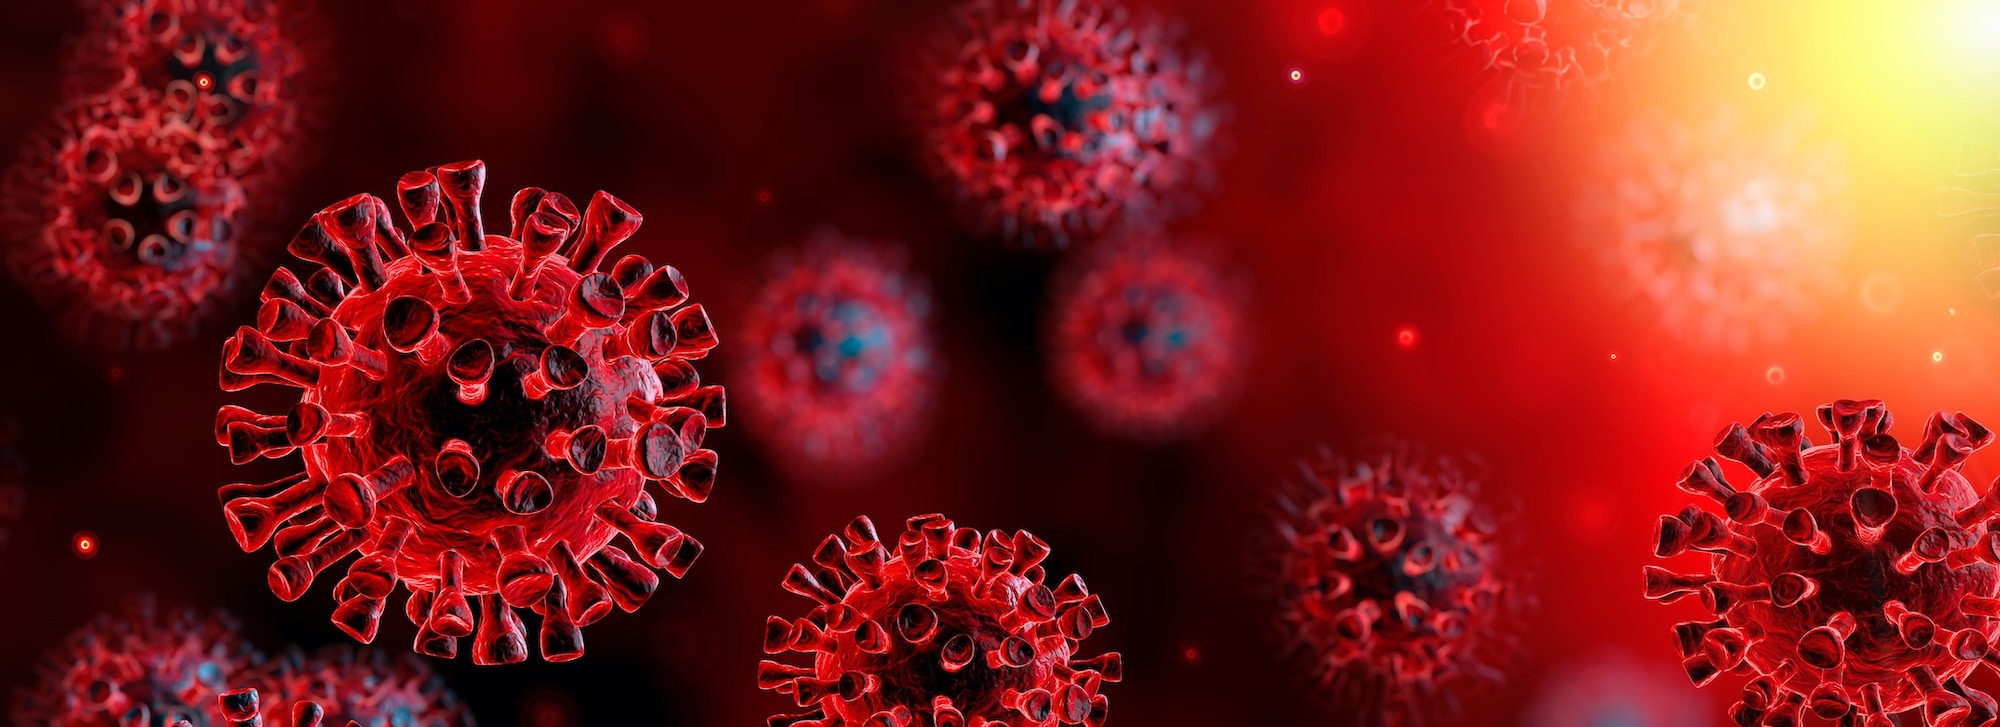 What Is Coronavirus? | Covid-19 Disinfectants Guide 2020 | Fikes Services